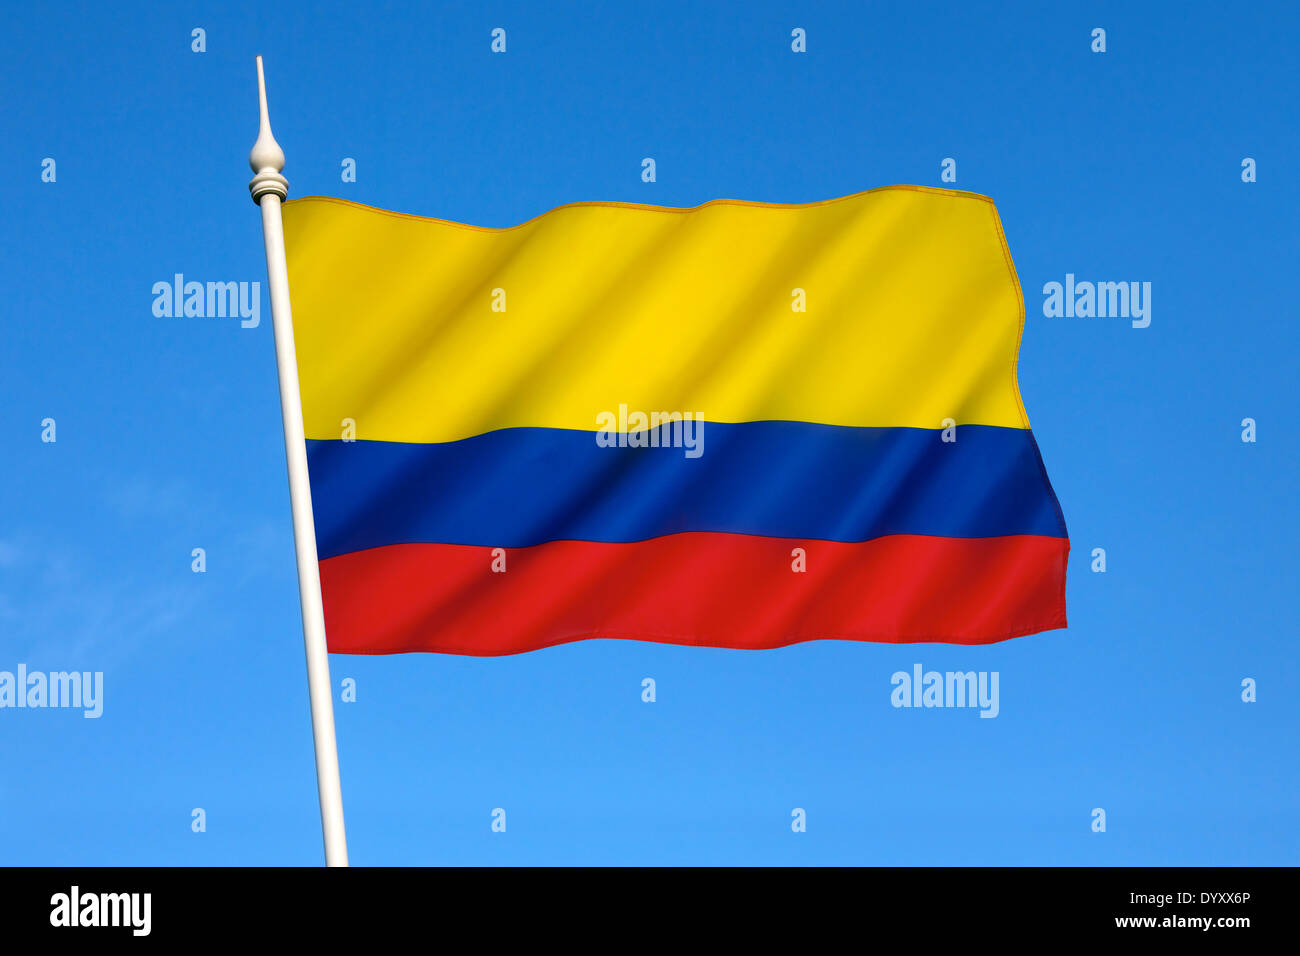 The national flag of Colombia Stock Photo